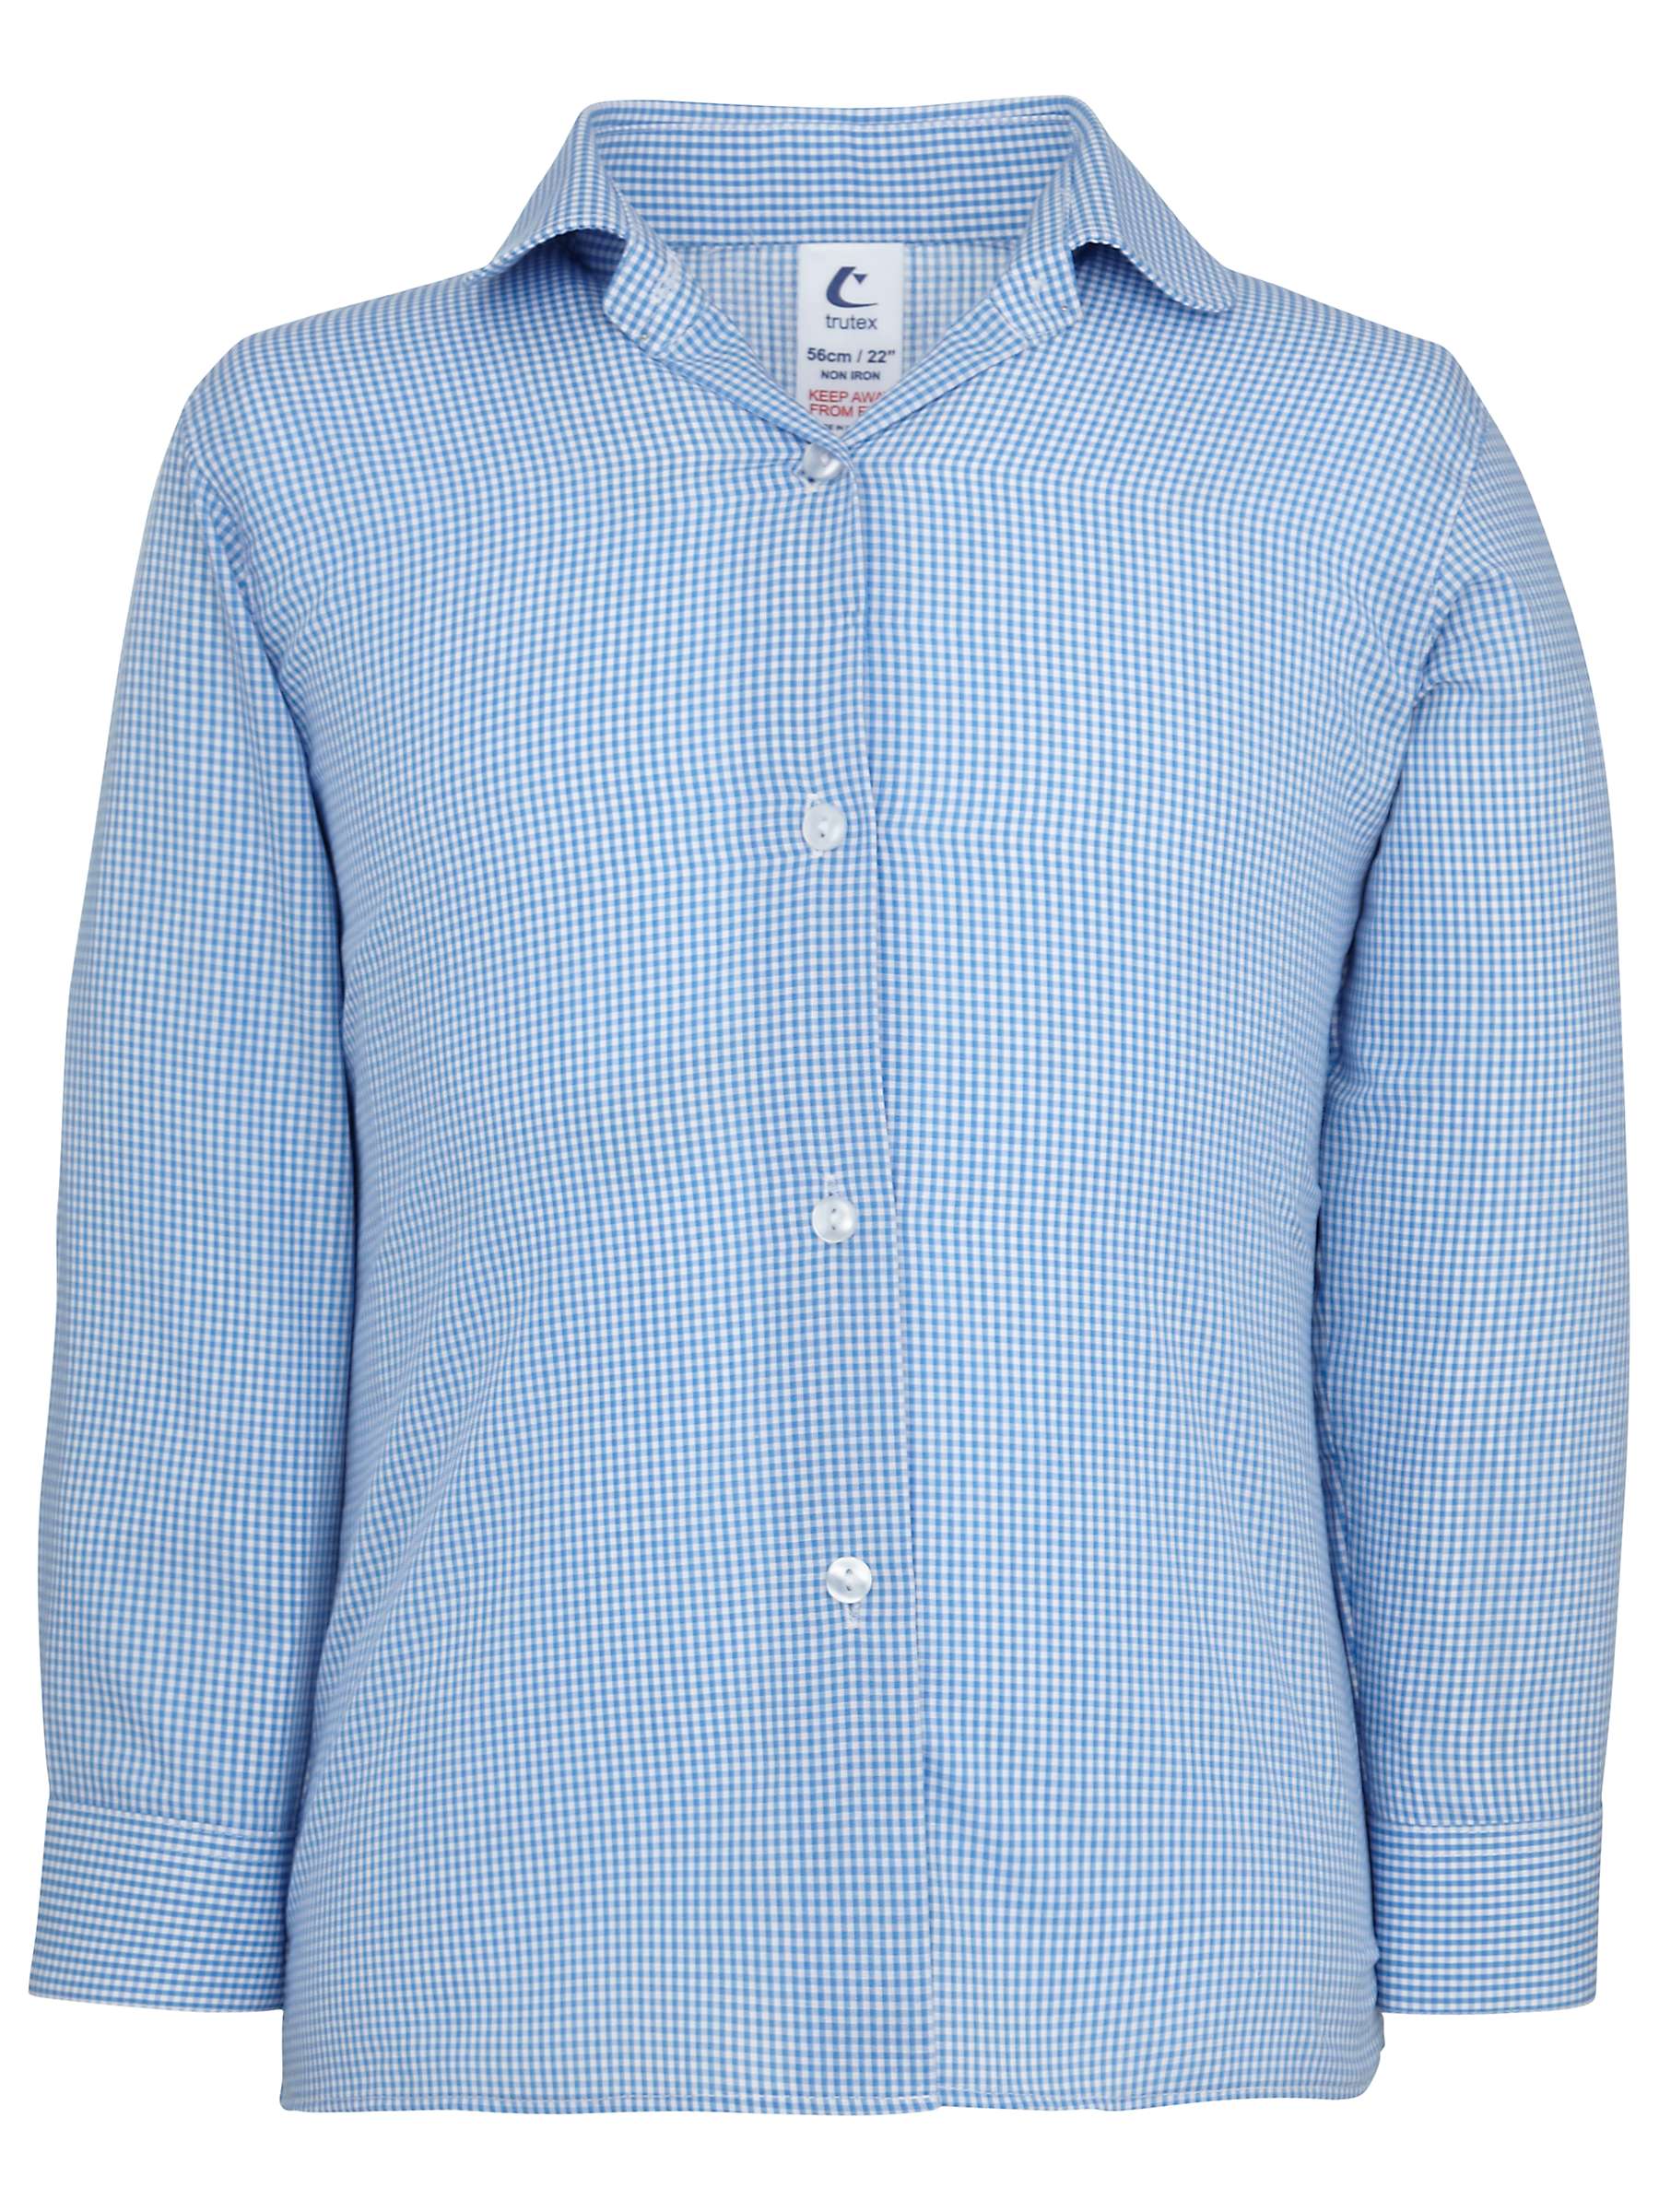 Buy Girls' School Long Sleeve Checked Blouse, Pack of 2, Blue/White Online at johnlewis.com